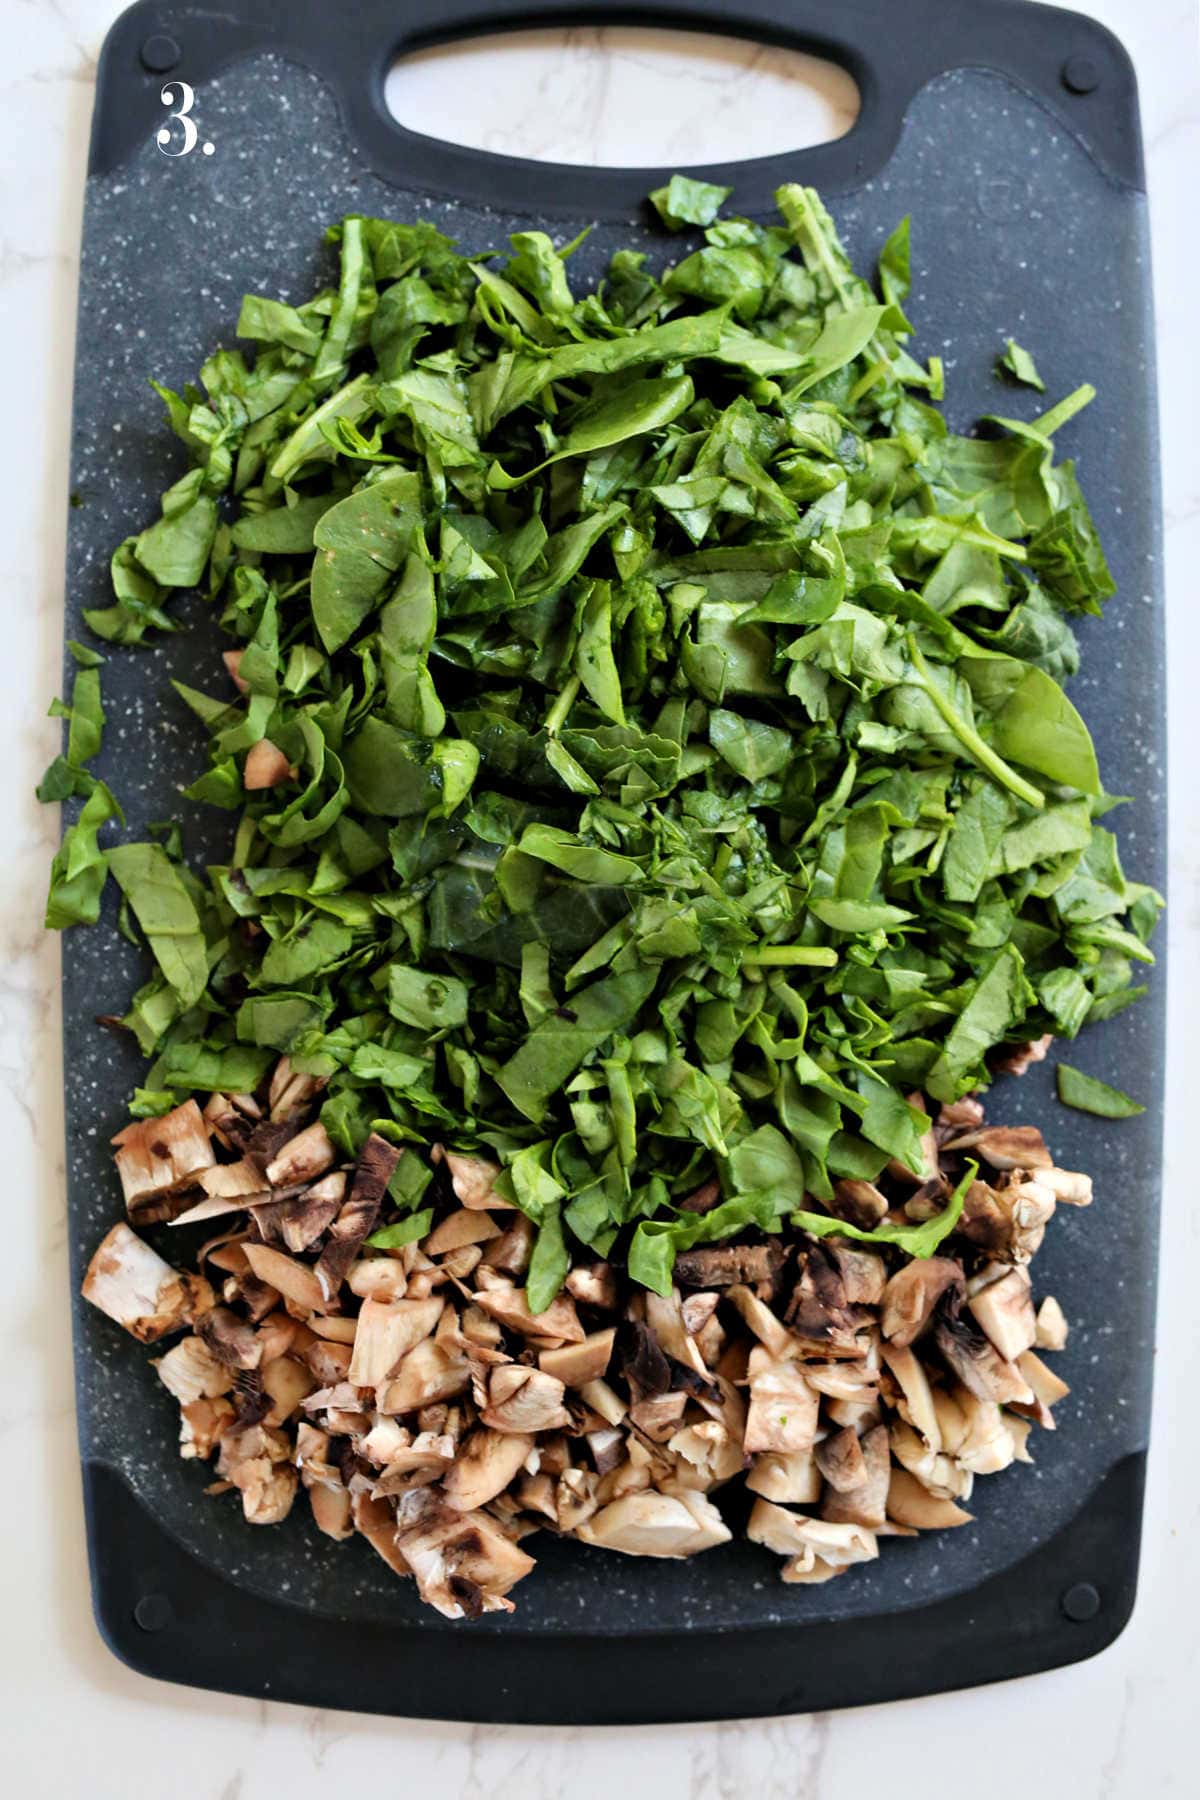 Chopped mushrooms and spinach on a cutting board.